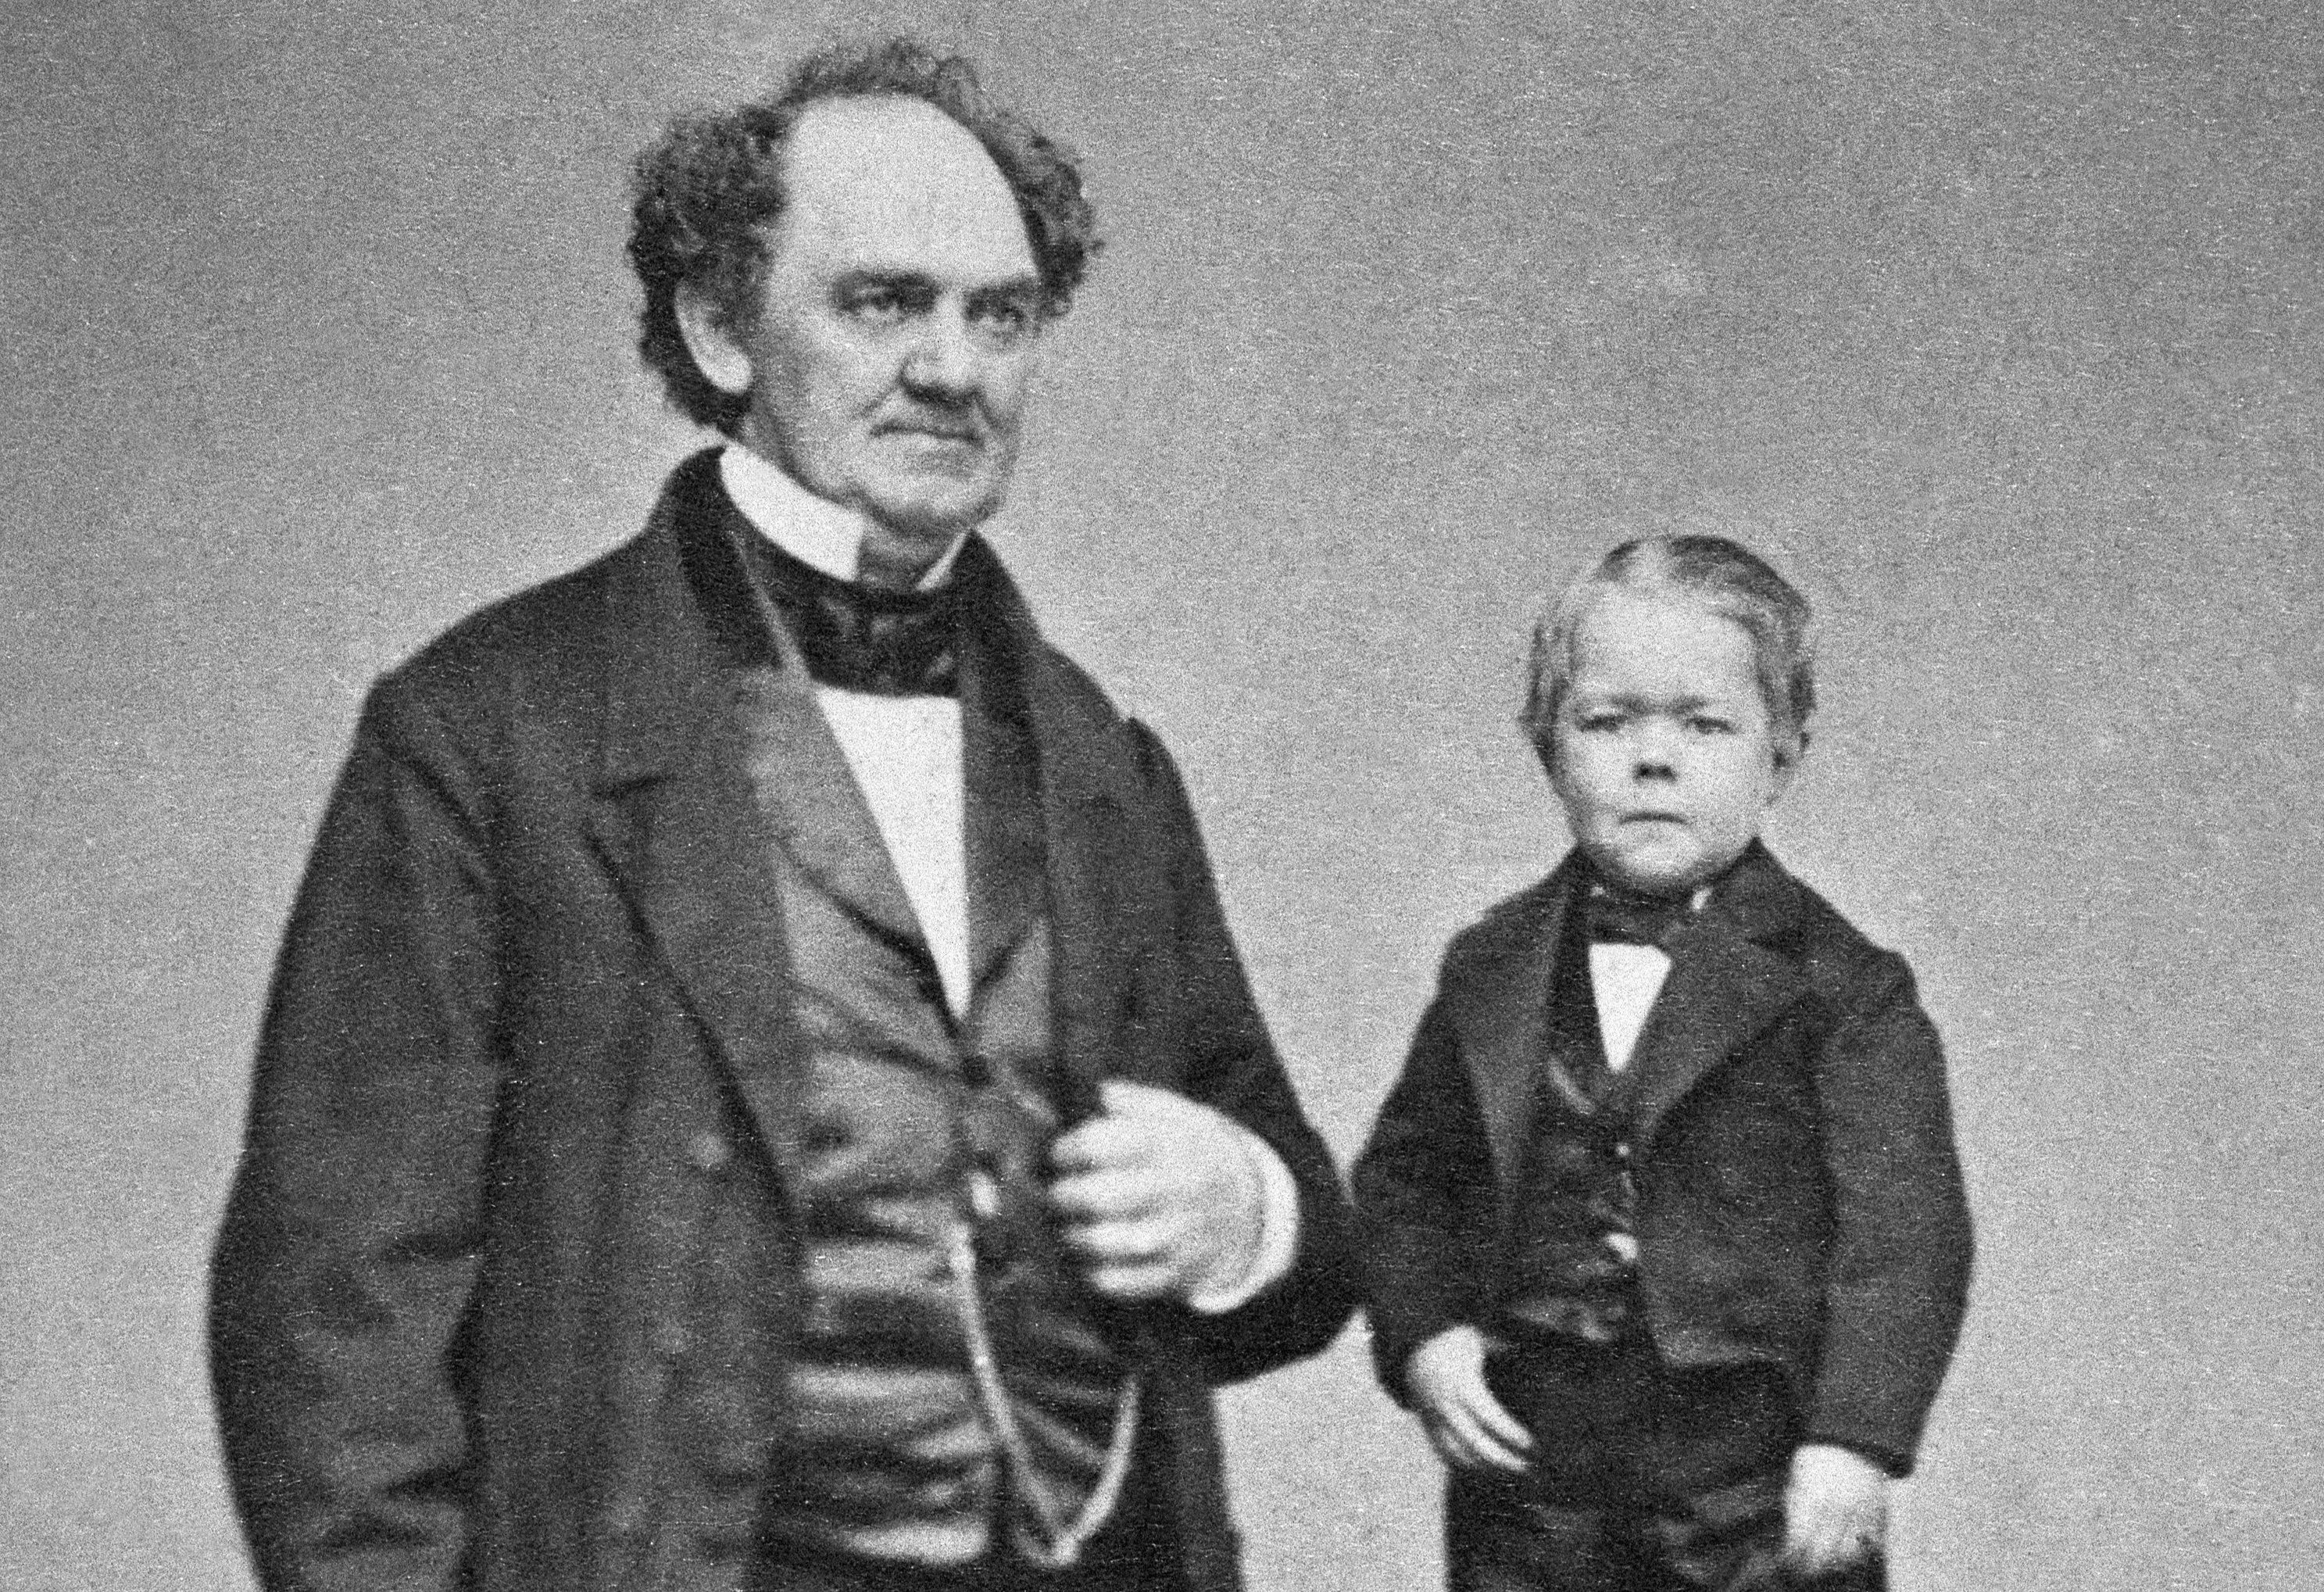 General Tom Thumb, P.T. Barnum's greatest attraction